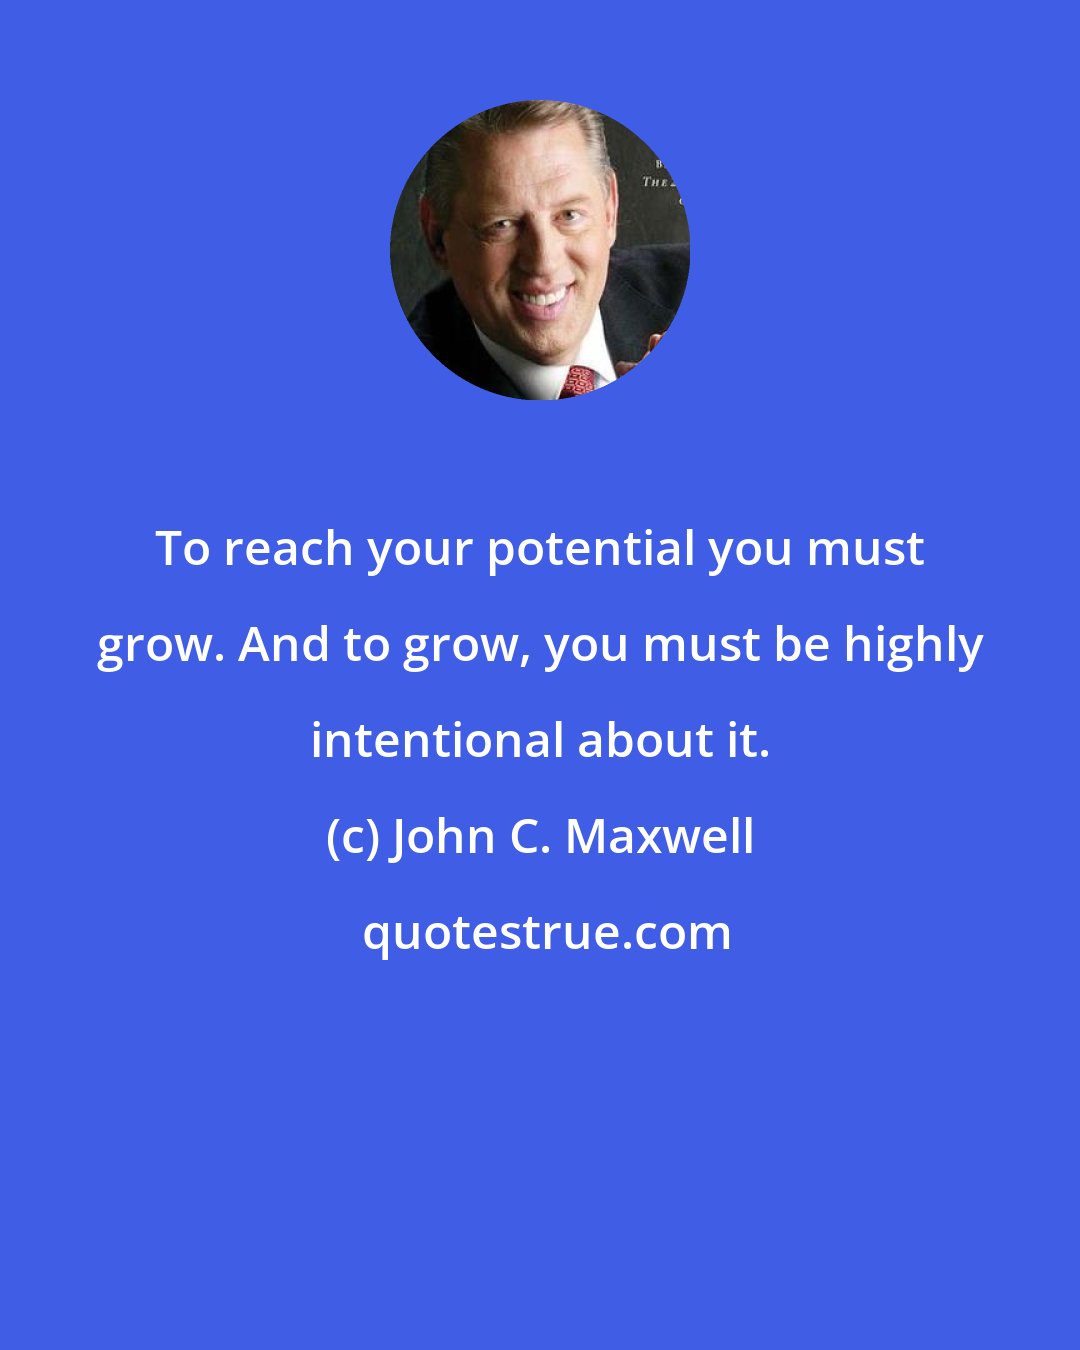 John C. Maxwell: To reach your potential you must grow. And to grow, you must be highly intentional about it.